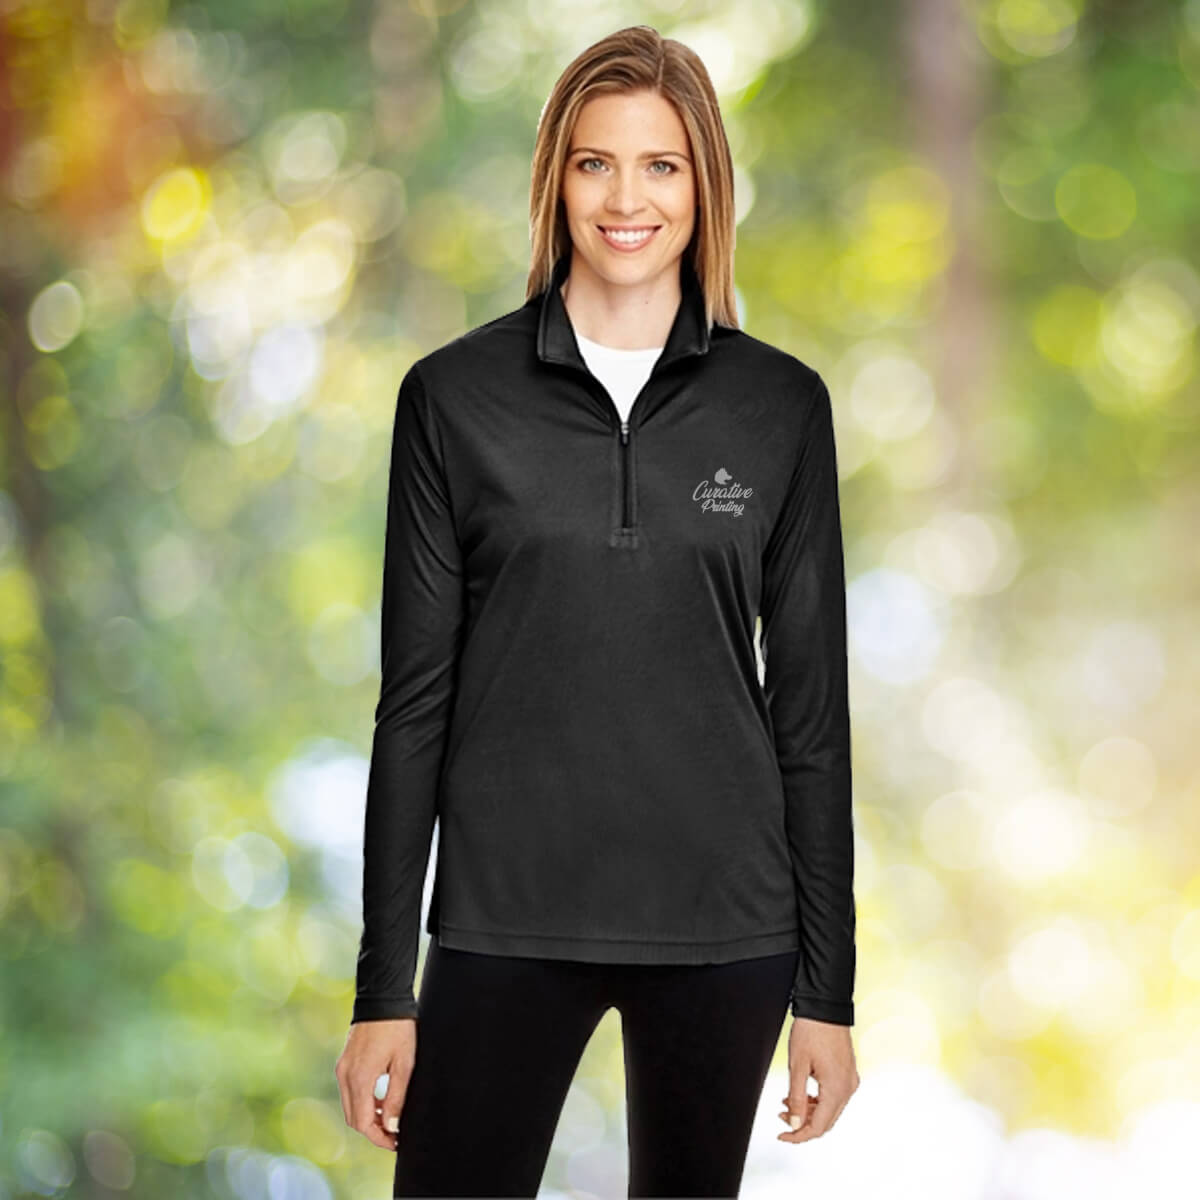 Woman in the outdoors wearing black quarter zip sweatshirt apparel with white curative printing logo imprint